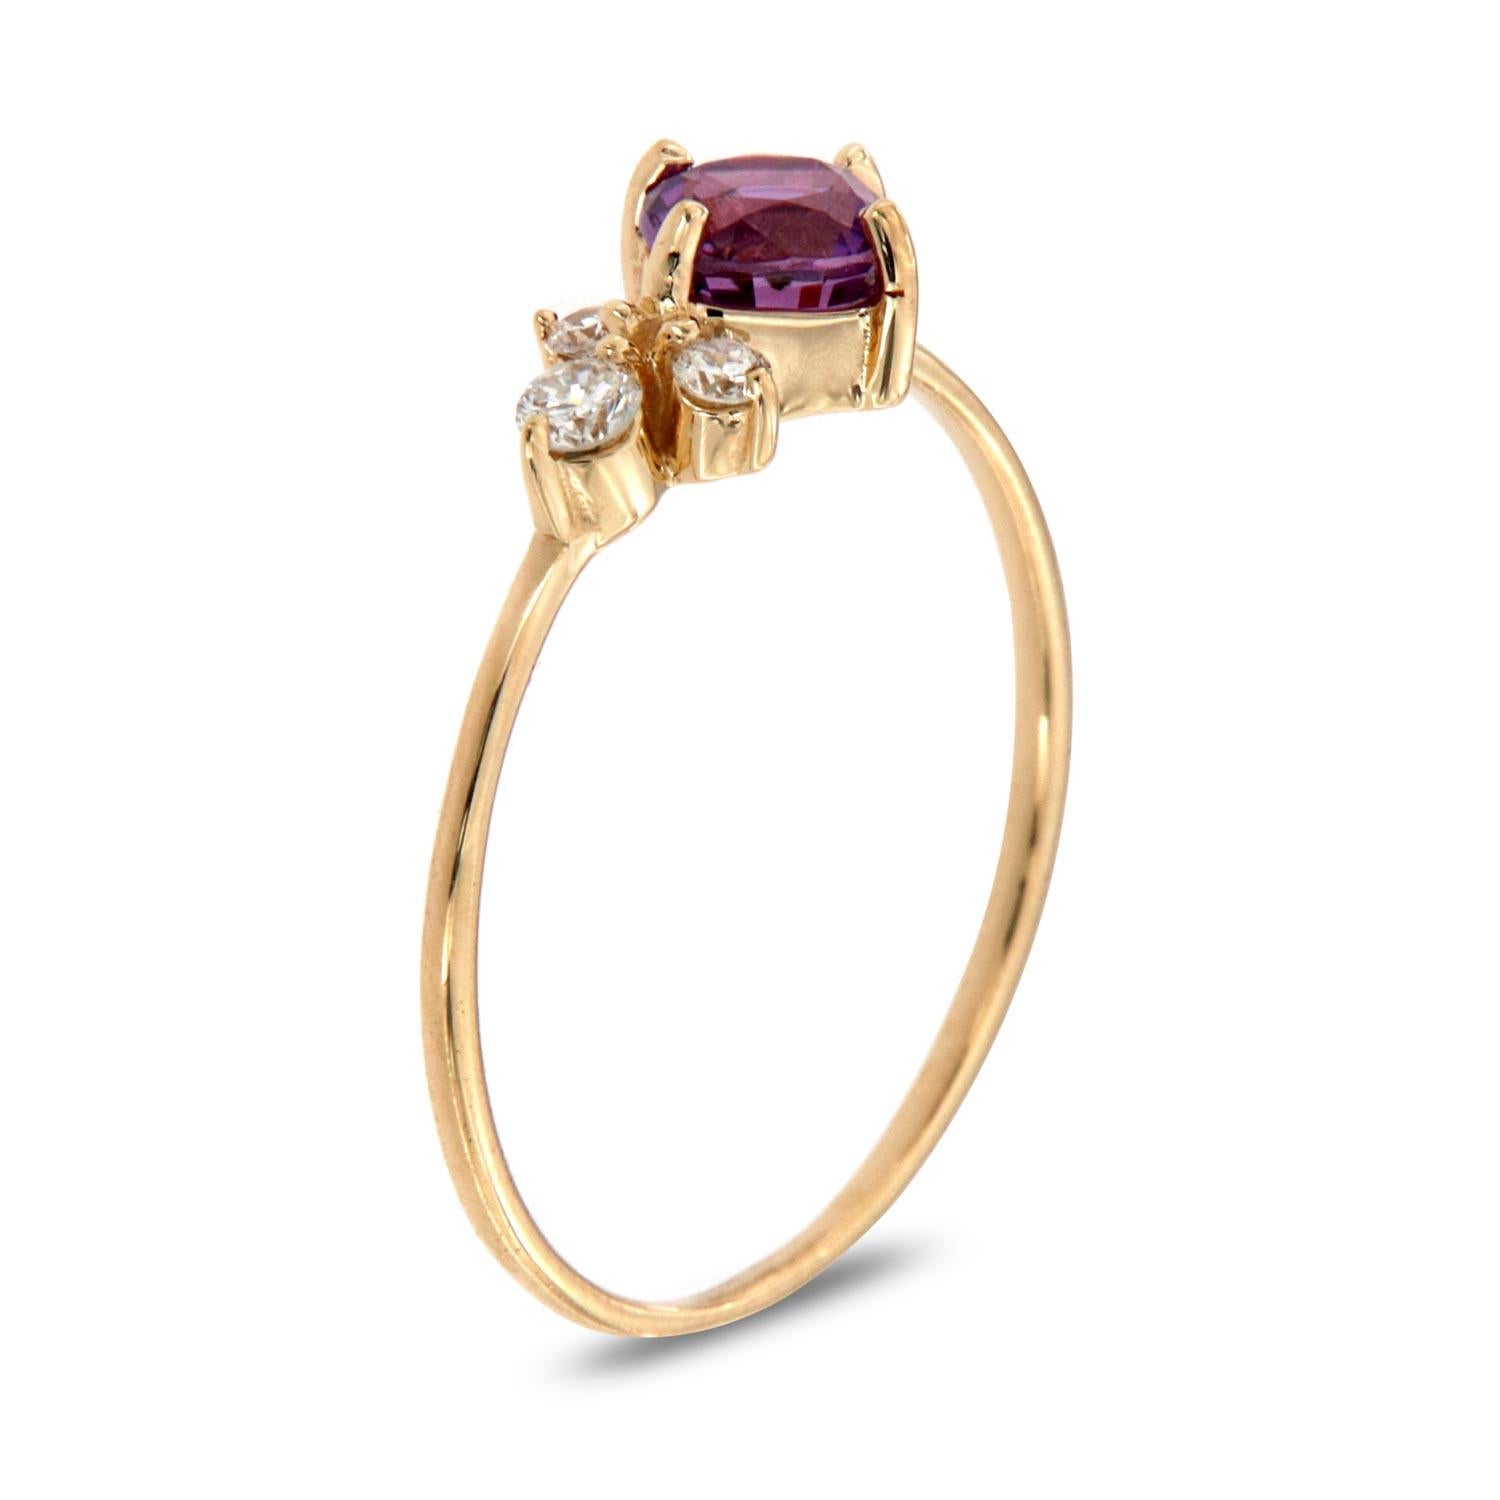 This petite organic designed ring is impressive in its vintage appeal, featuring a natural purple cushion shape sapphire, accented with a cluster of round brilliant diamonds. Experience the difference in person!

Product details: 

Center Gemstone